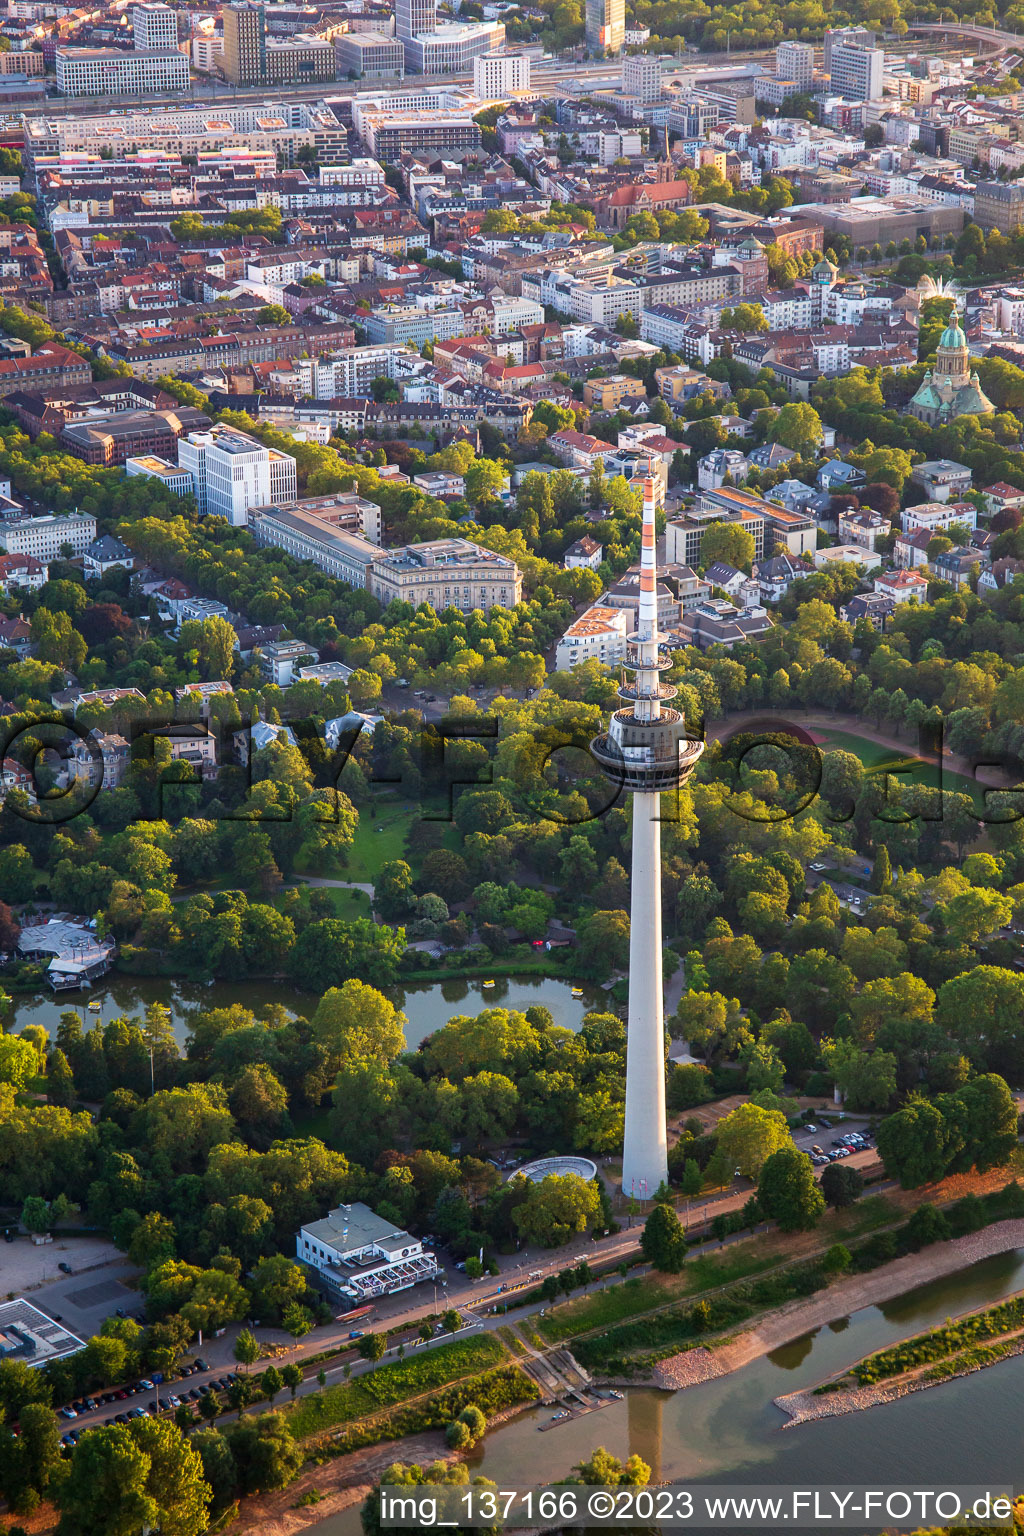 Telecommunications tower Mannheim in the district Neckarstadt-Ost in Mannheim in the state Baden-Wuerttemberg, Germany